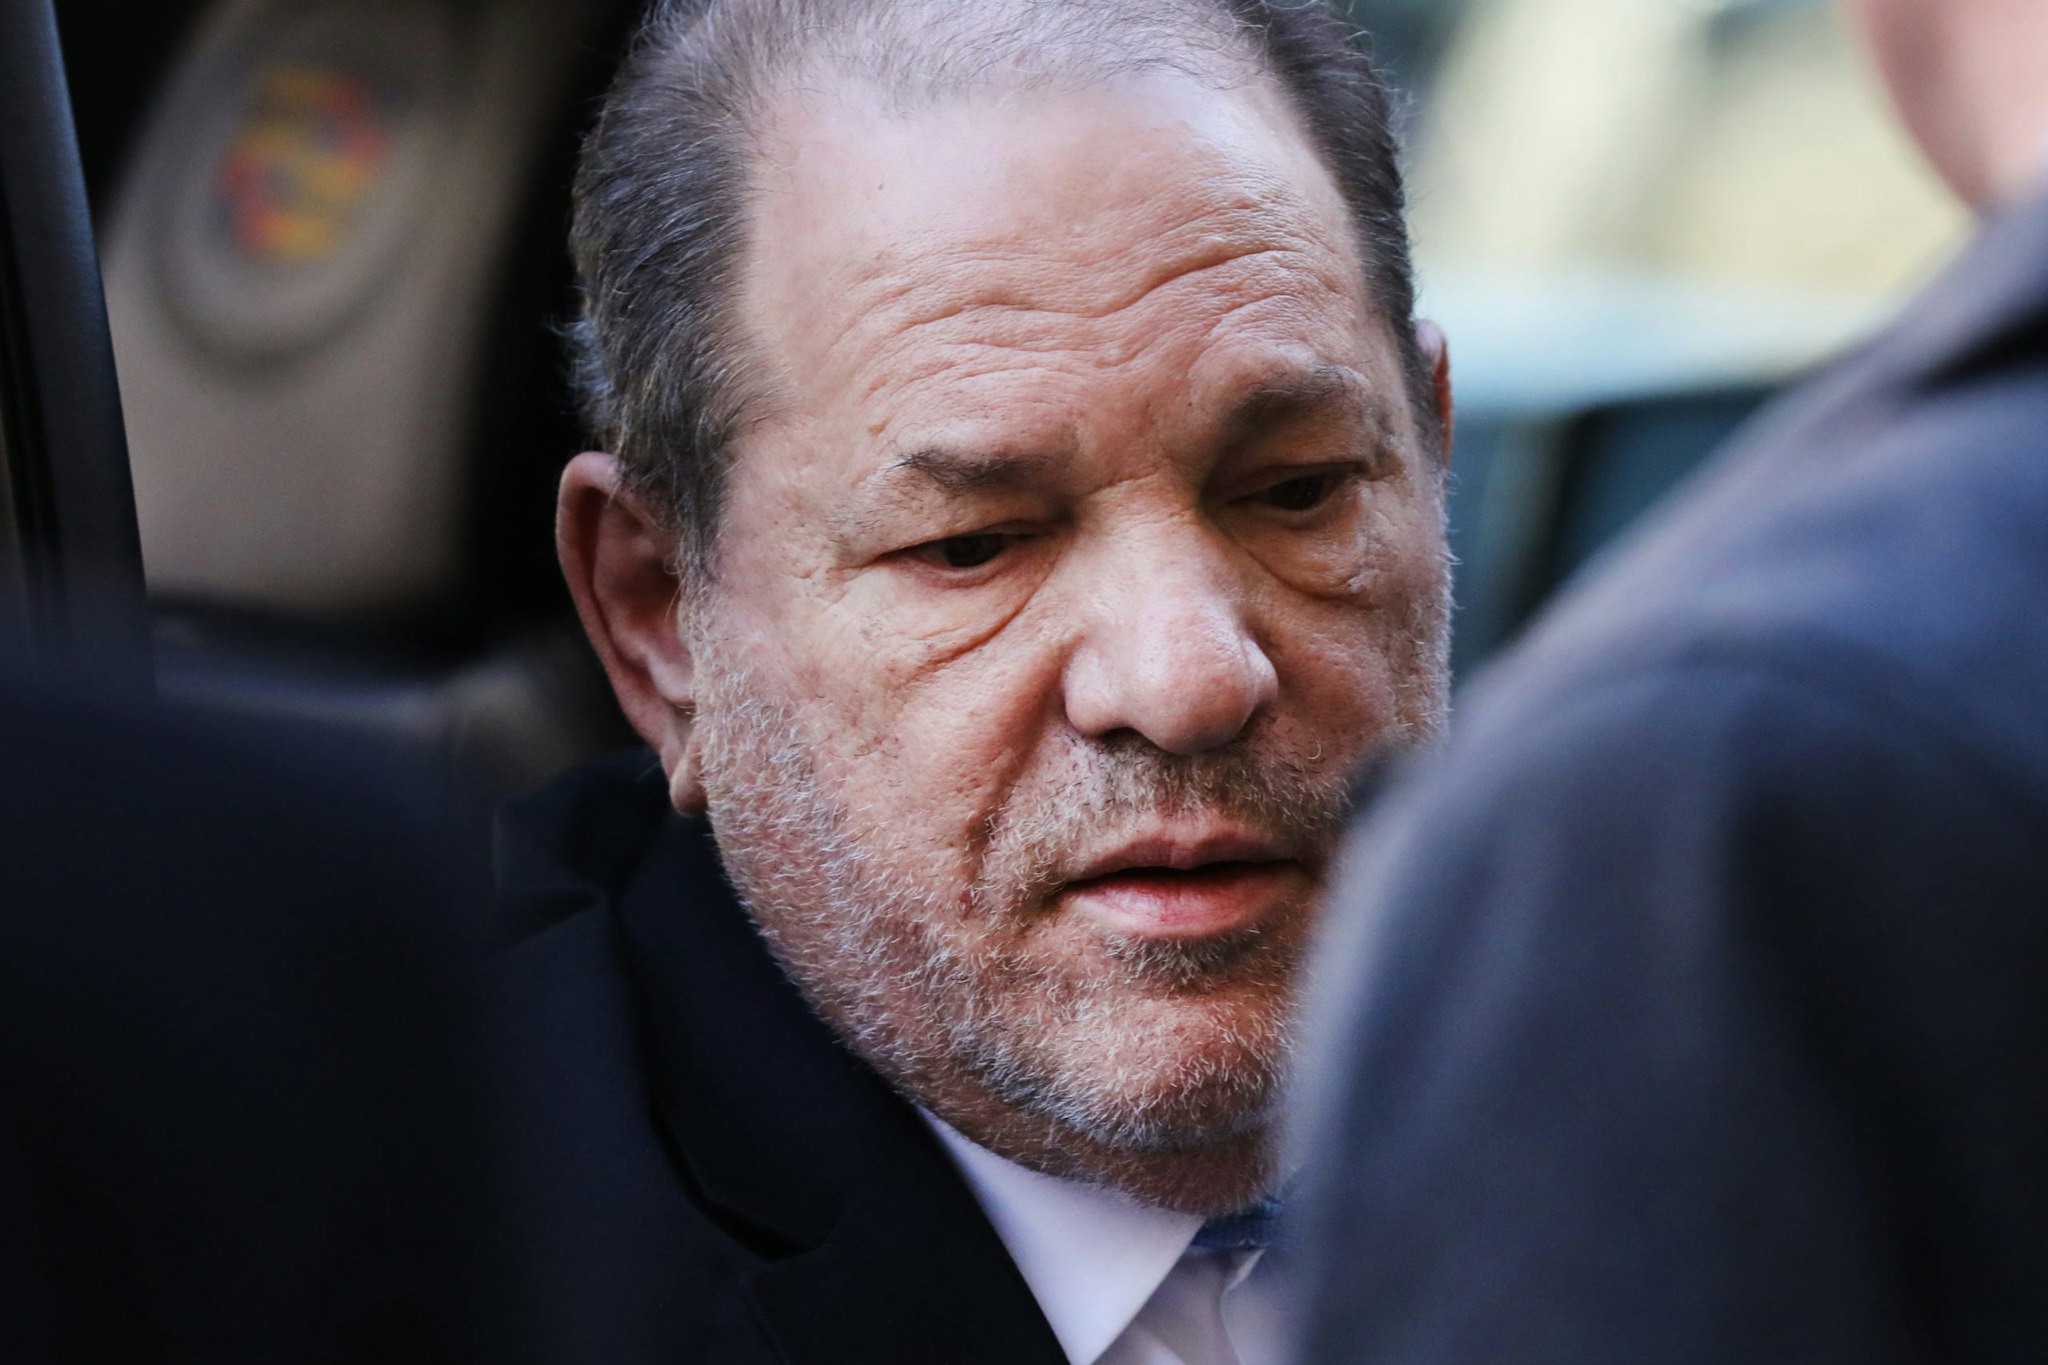 NEW YORK, NEW YORK - FEBRUARY 24: Harvey Weinstein enters a Manhattan court house as a jury continues with deliberations in his trial on February 24, 2020 in New York City. On Friday the judge asked the jury to keep deliberating after they announced that they are deadlocked on the charges of predatory sexual assault. Weinstein, a movie producer whose alleged sexual misconduct helped spark the #MeToo movement, pleaded not-guilty on five counts of rape and sexual assault against two unnamed women and faces a possible life sentence in prison. (Photo by Spencer Platt/Getty Images)